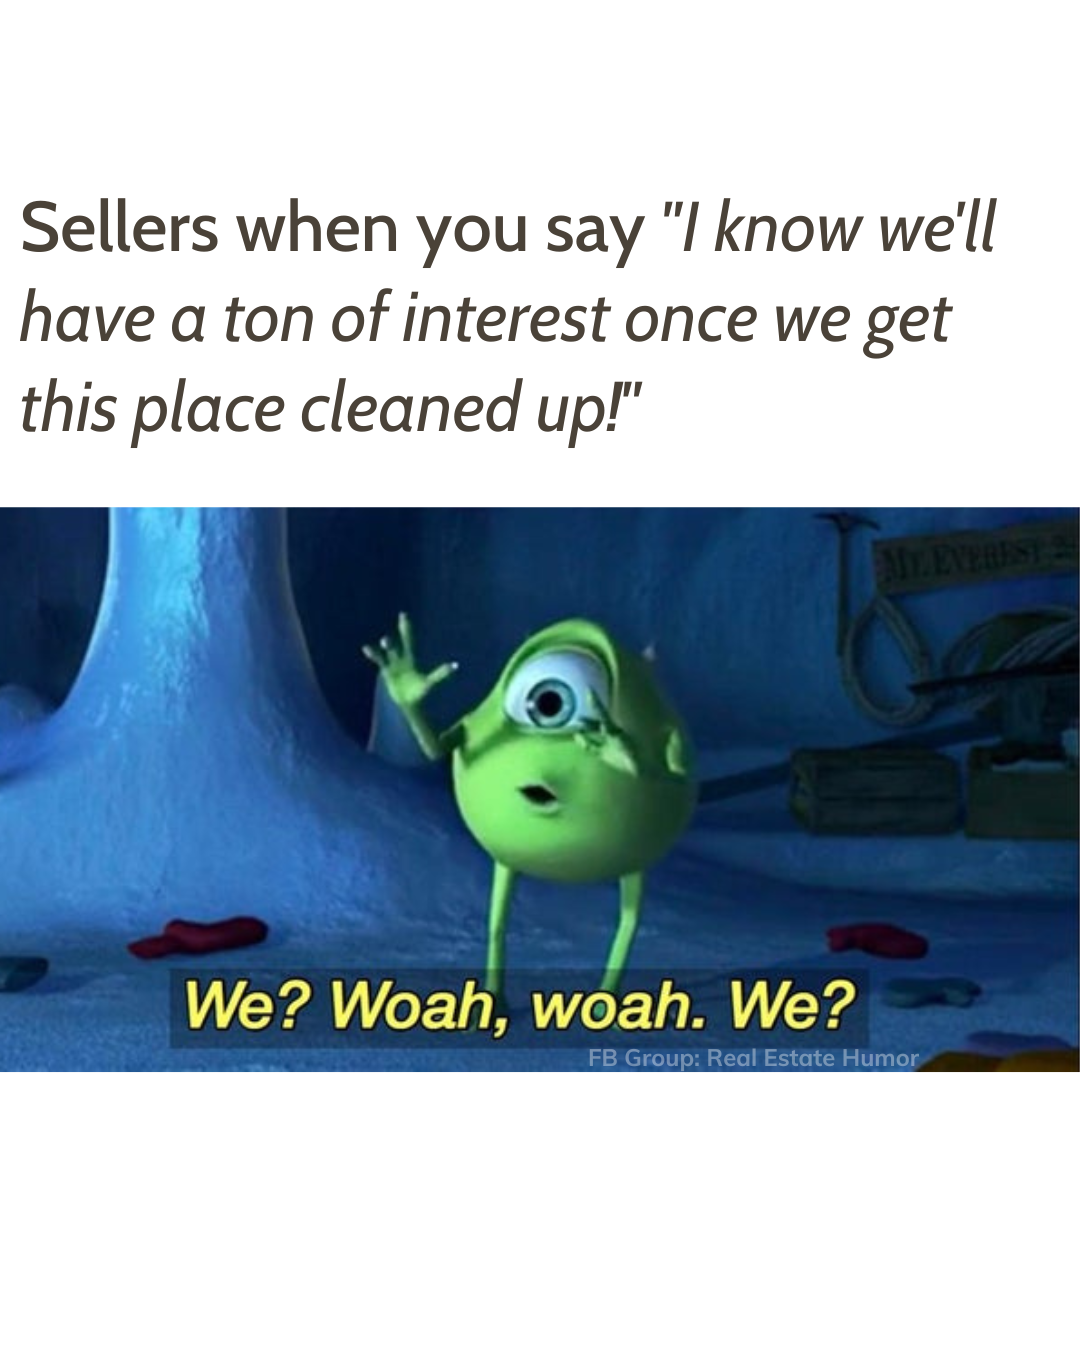 Asking a seller to clean the house before showings (Real Estate Memes) - Mike from Monsters Inc. has the perfect reaction face with "We? Woah, woah. We?" Share with fellow real estate agents and your clients for a good laugh.